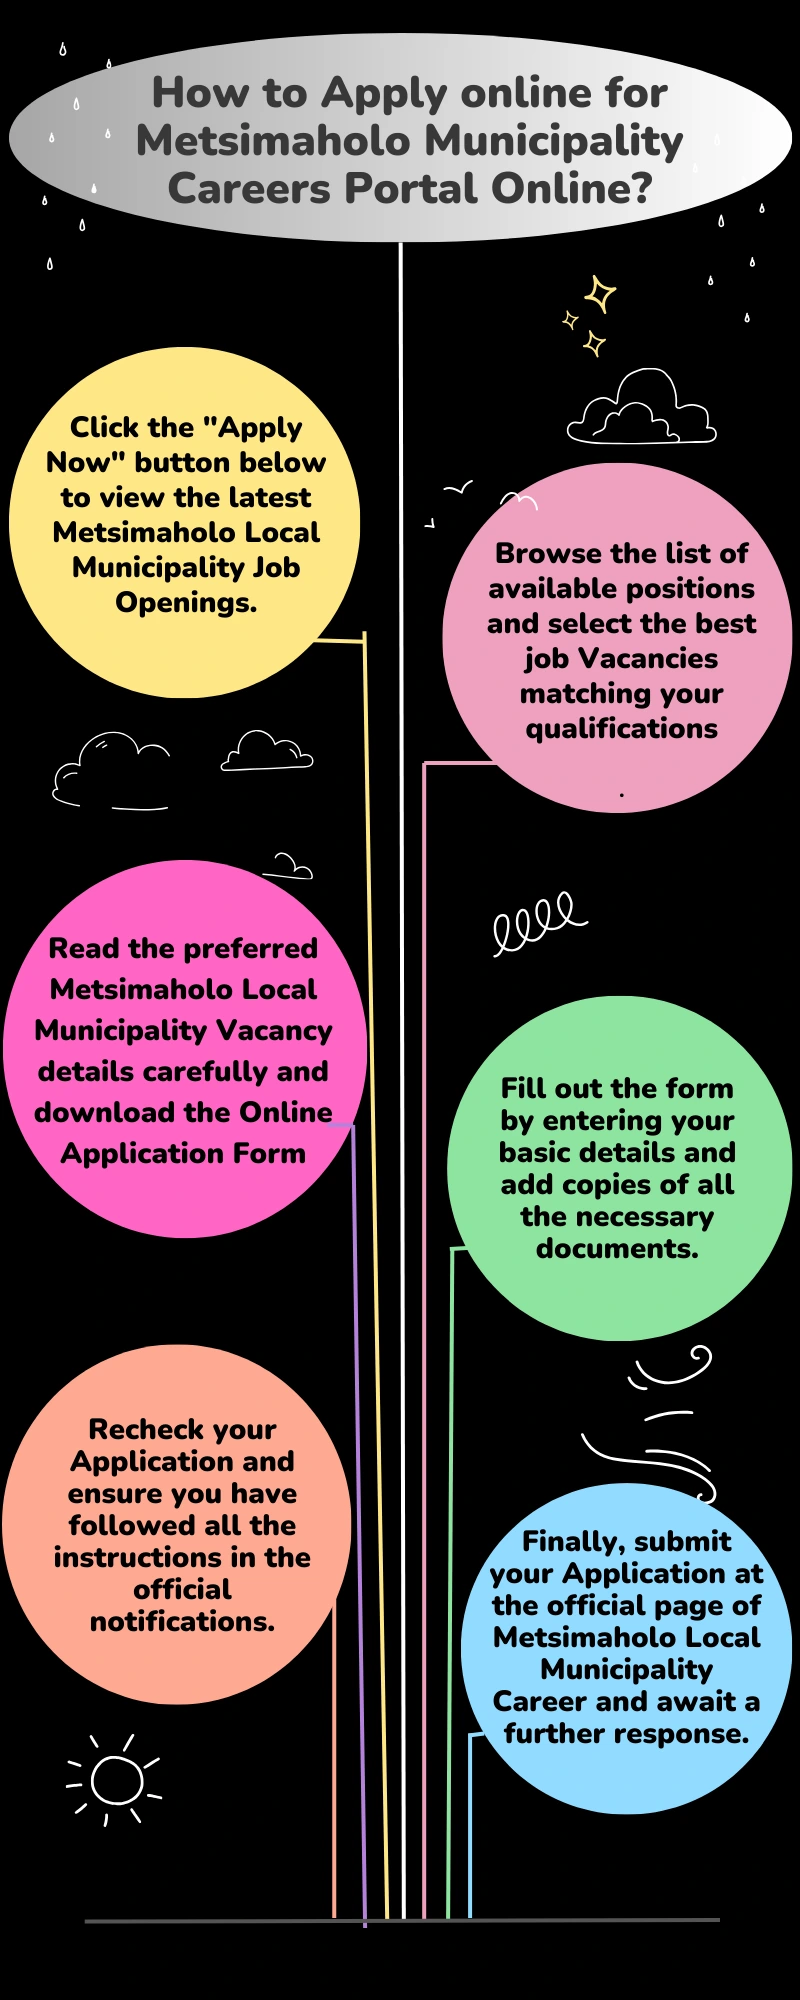 How to Apply online for Metsimaholo Municipality Careers Portal Online?